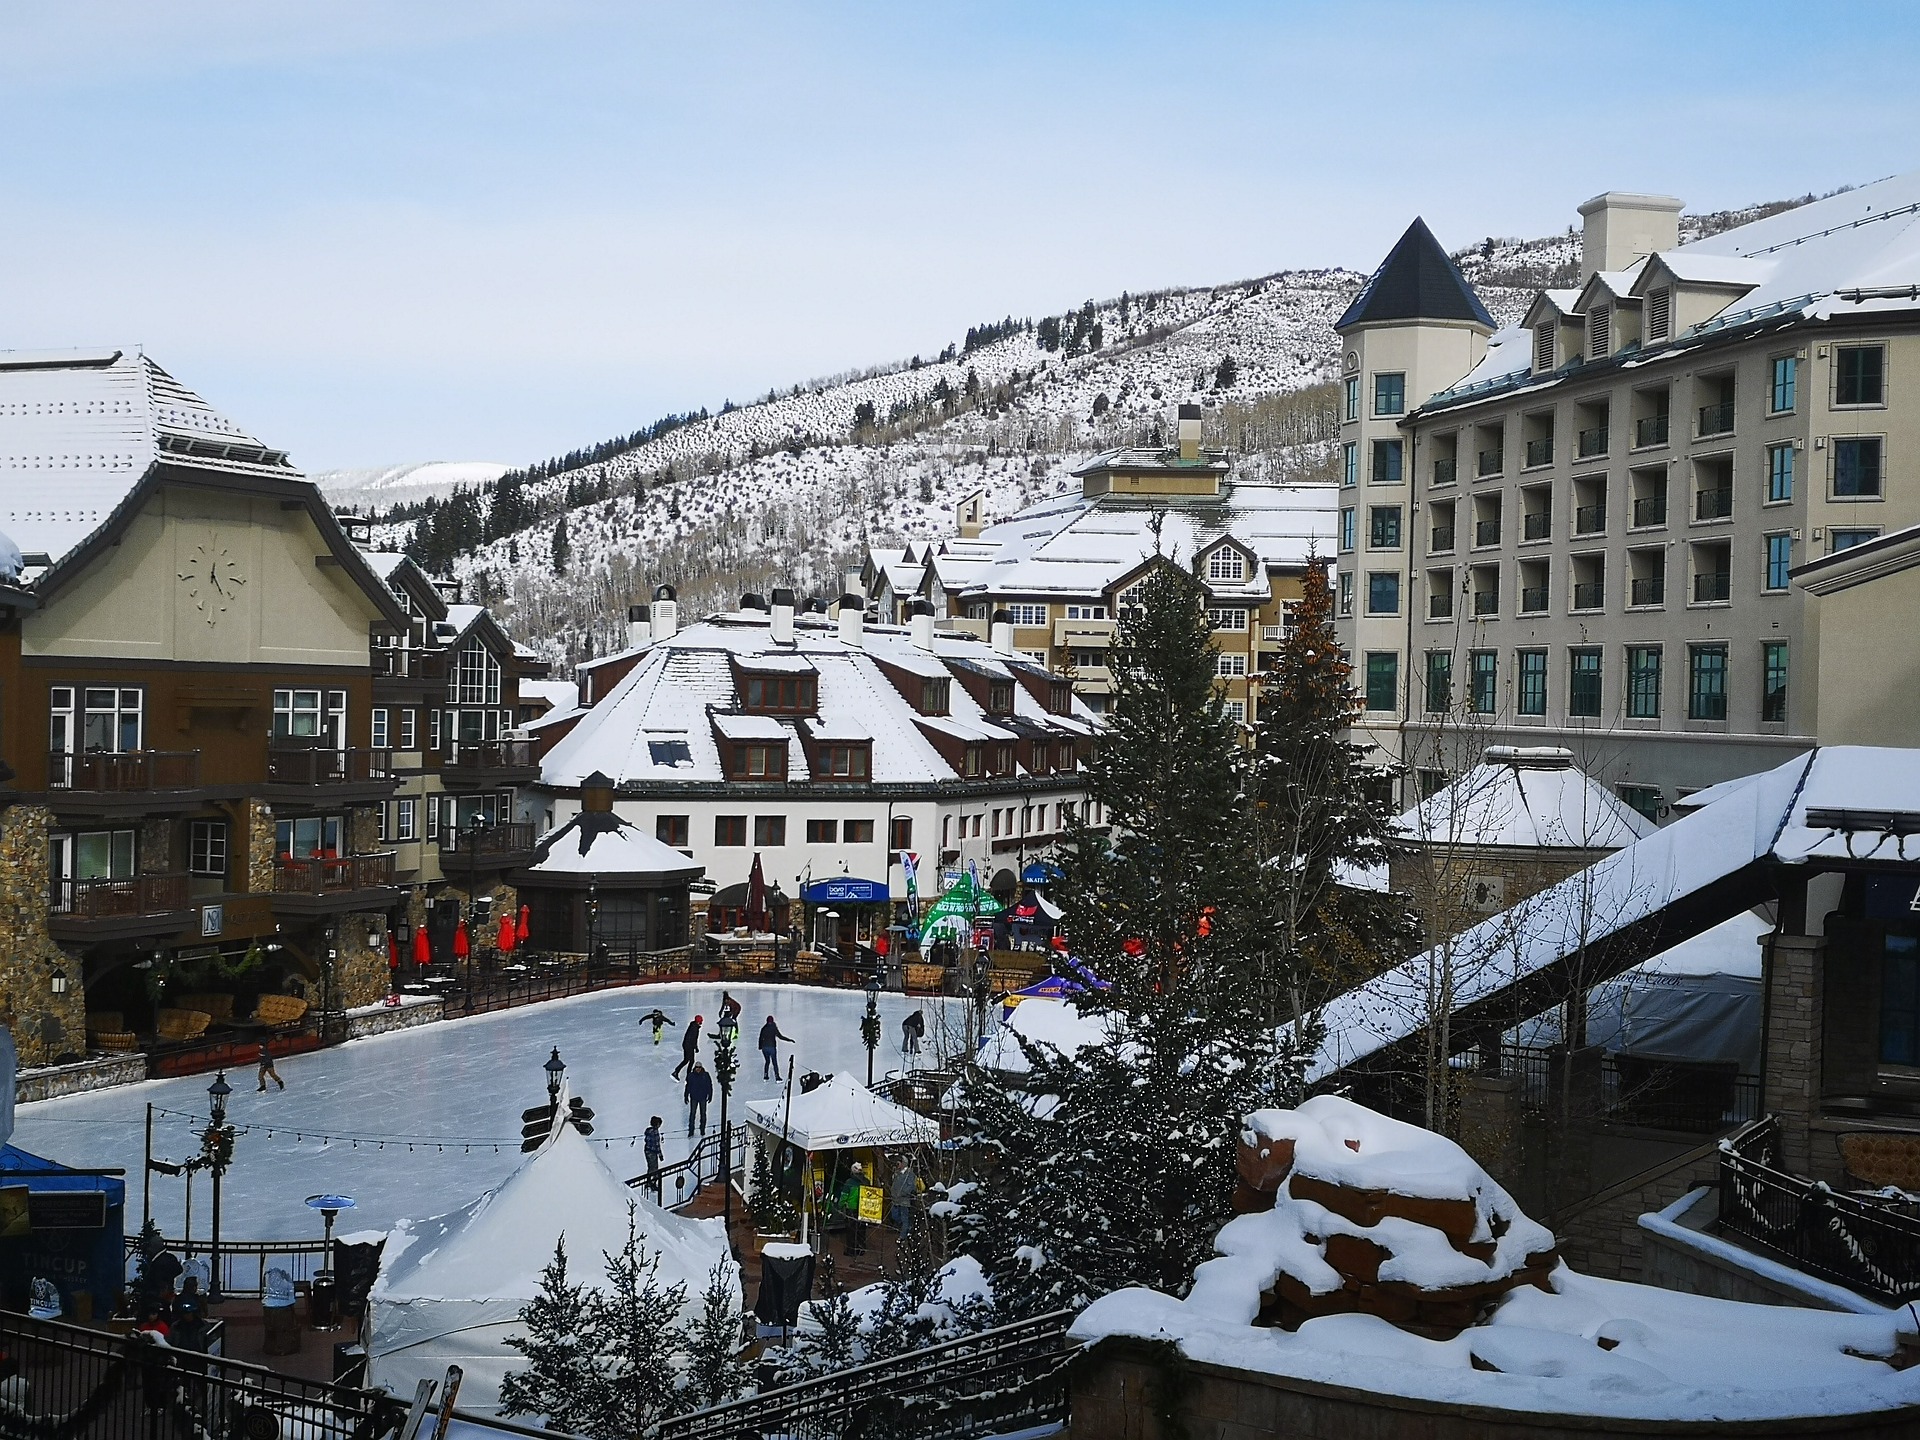 How to Choose the Best Ski Resorts for Airbnb?